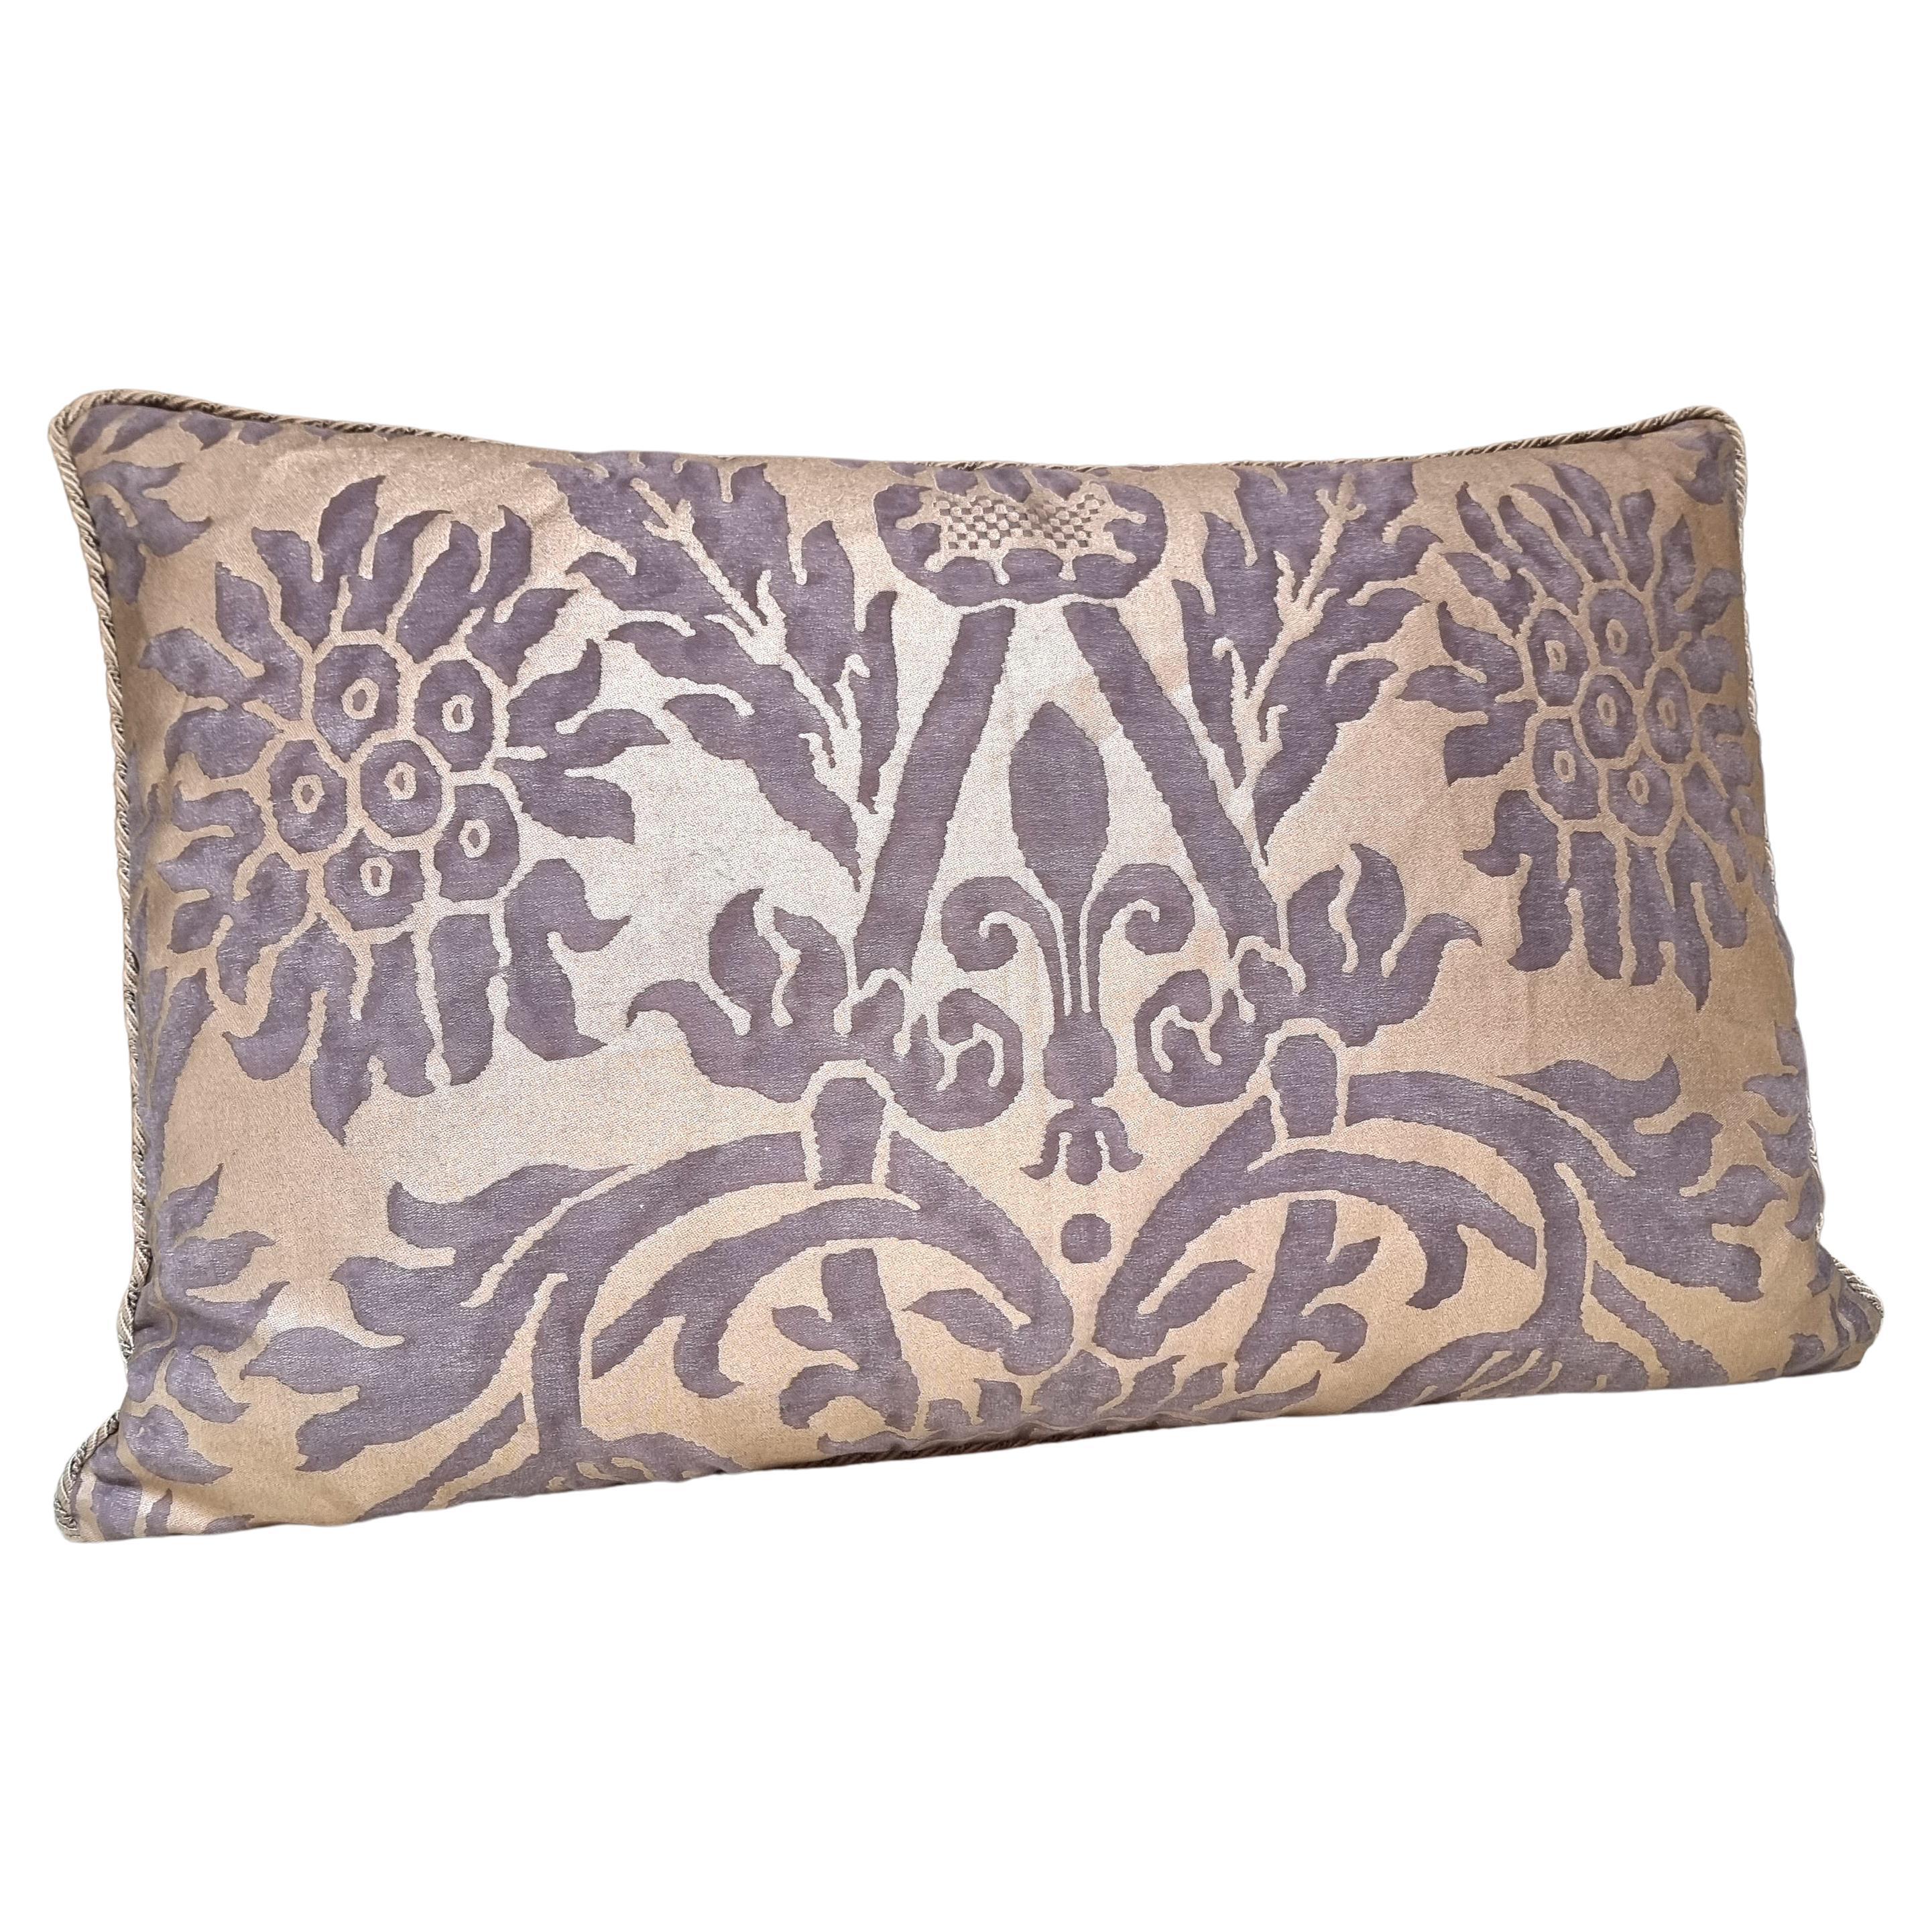 This amazing double-sided lumbar pillow is handmade using Fortuny fabric Barberini pattern in grey, black & silvery gold.
The pillow is embellished all along the four edges with twisted cord.
The pillow cover is fully lined, there is an invisible